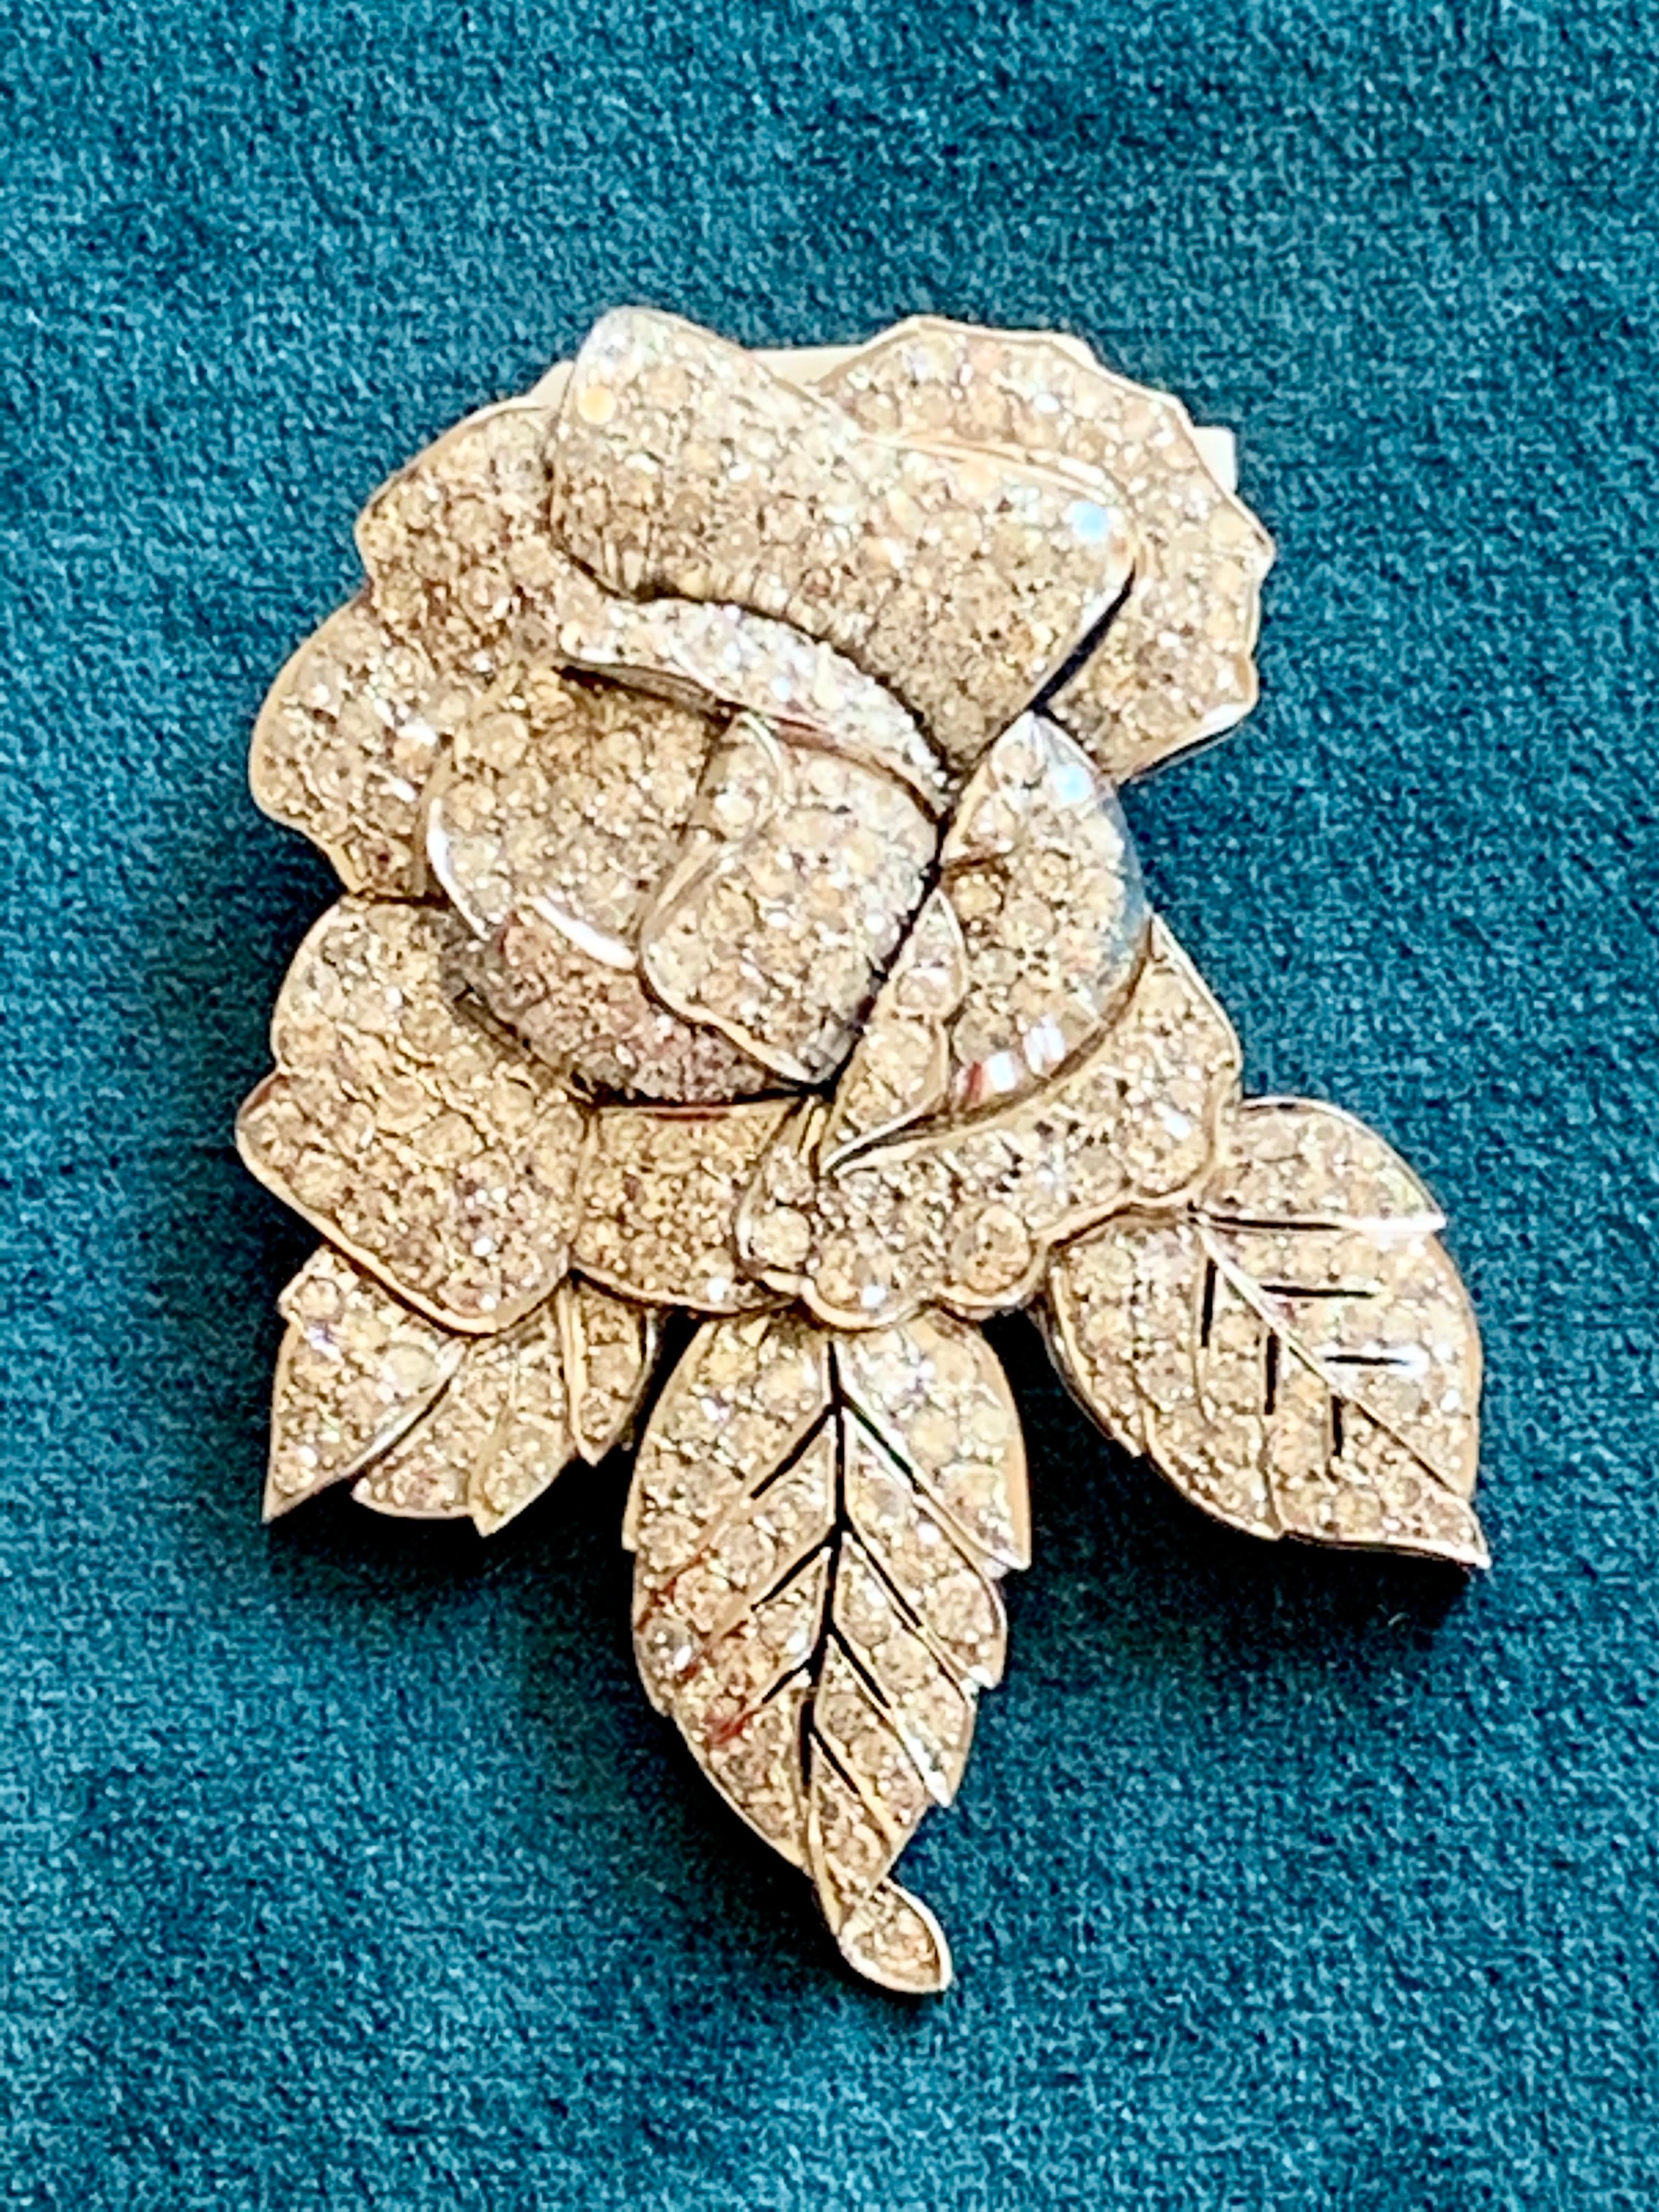 Platinum and Diamond Flower Clip- Brooch The stylized flower brooch is pavé-set with 286 brilliant cut diamonds weighing approximately 10.00 ct.  Measuring 6.5cm x 4.6 cm. 